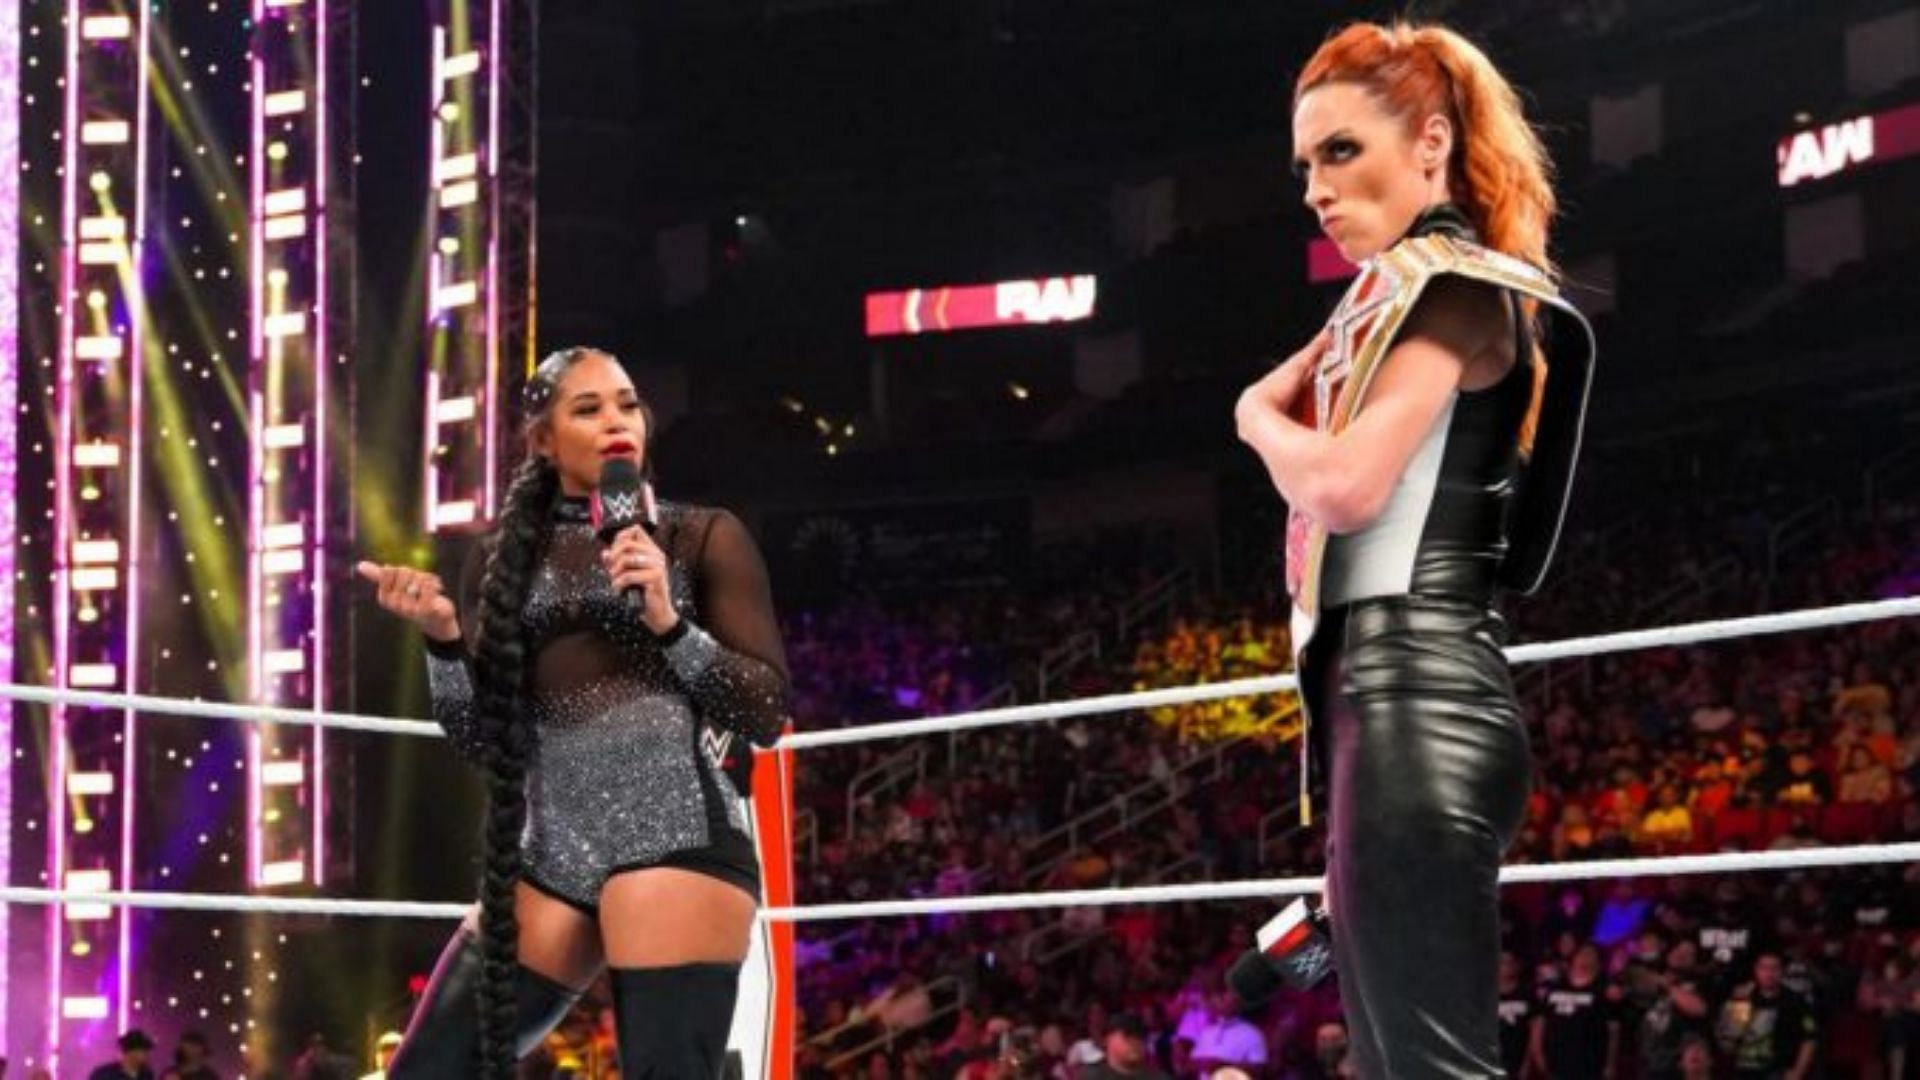 Becky Lynch and Bianca Belair will collide at WrestleMania 38